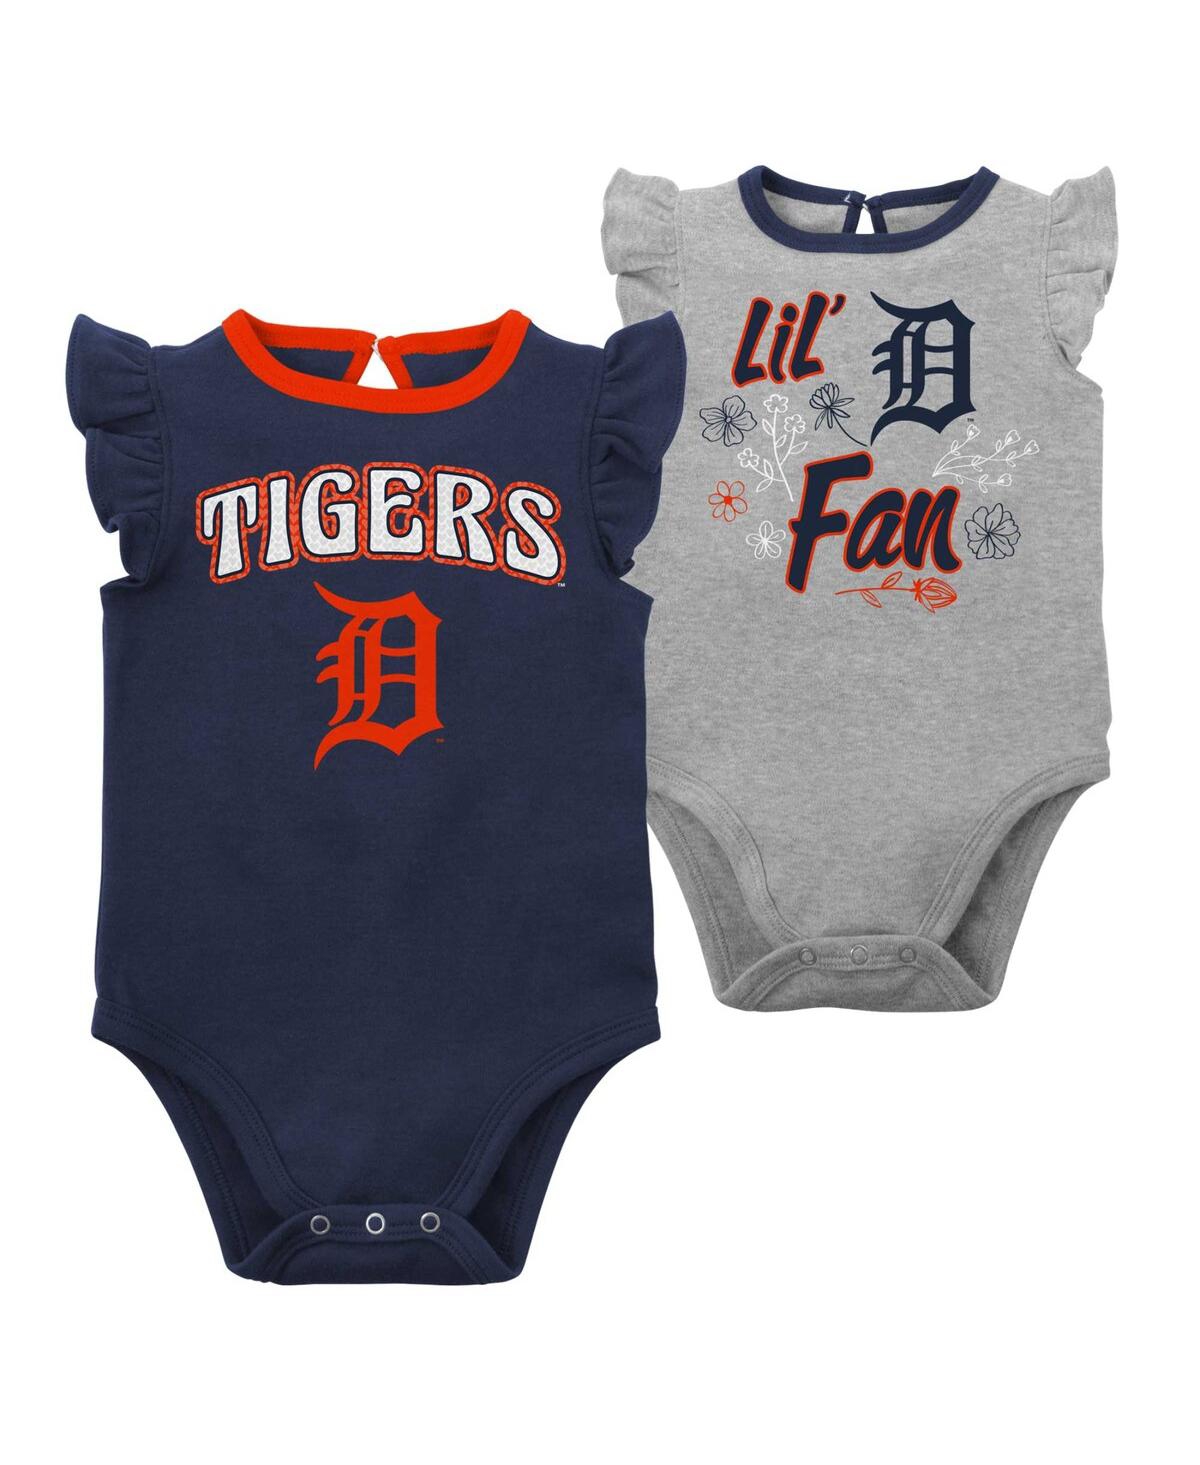 Outerstuff Babies' Newborn And Infant Boys And Girls Navy, Heather Gray Detroit Tigers Little Fan Two-pack Bodysuit Set In Navy,heather Gray